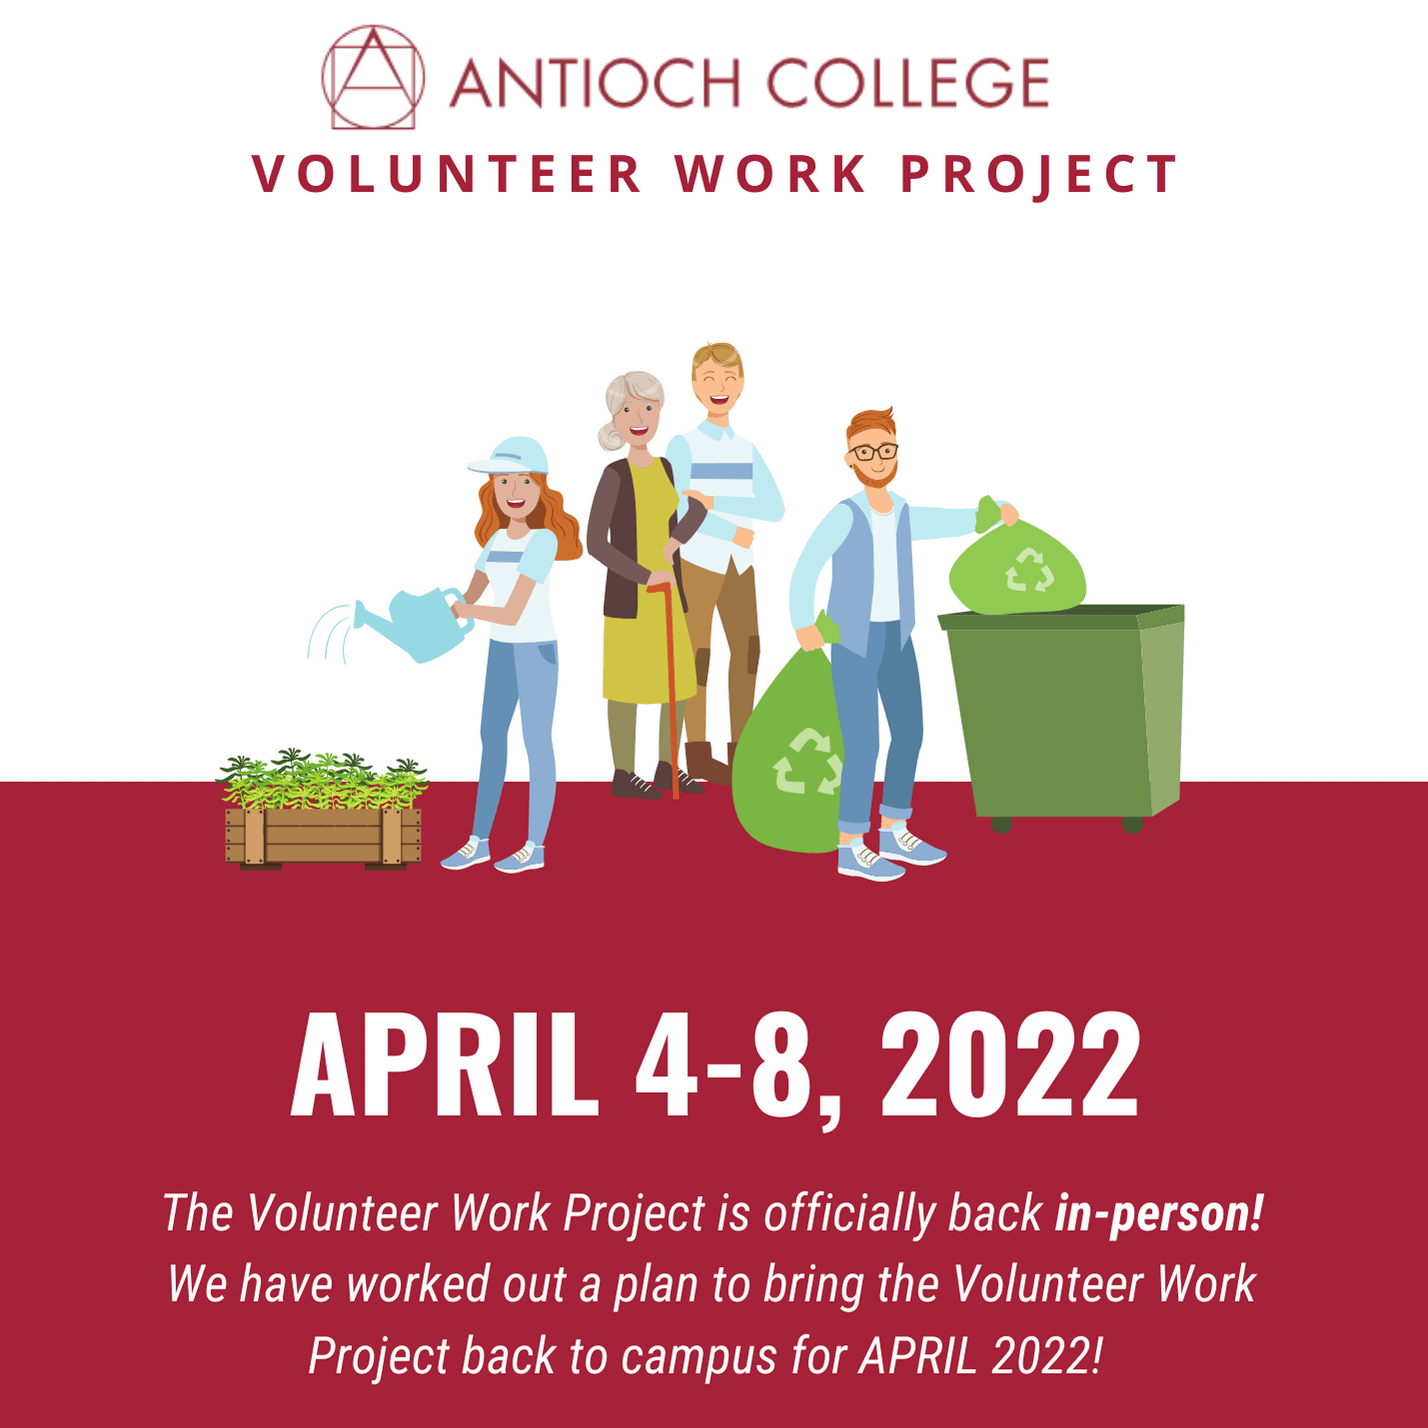 The top of the flyer has Antioch College Volunteer Work Project. The image is of people picking up debris and executing volunteer duties. The bottom as the event date and information relevant to the event. the dates are April 4-8, 2022 and this is an in-person event.